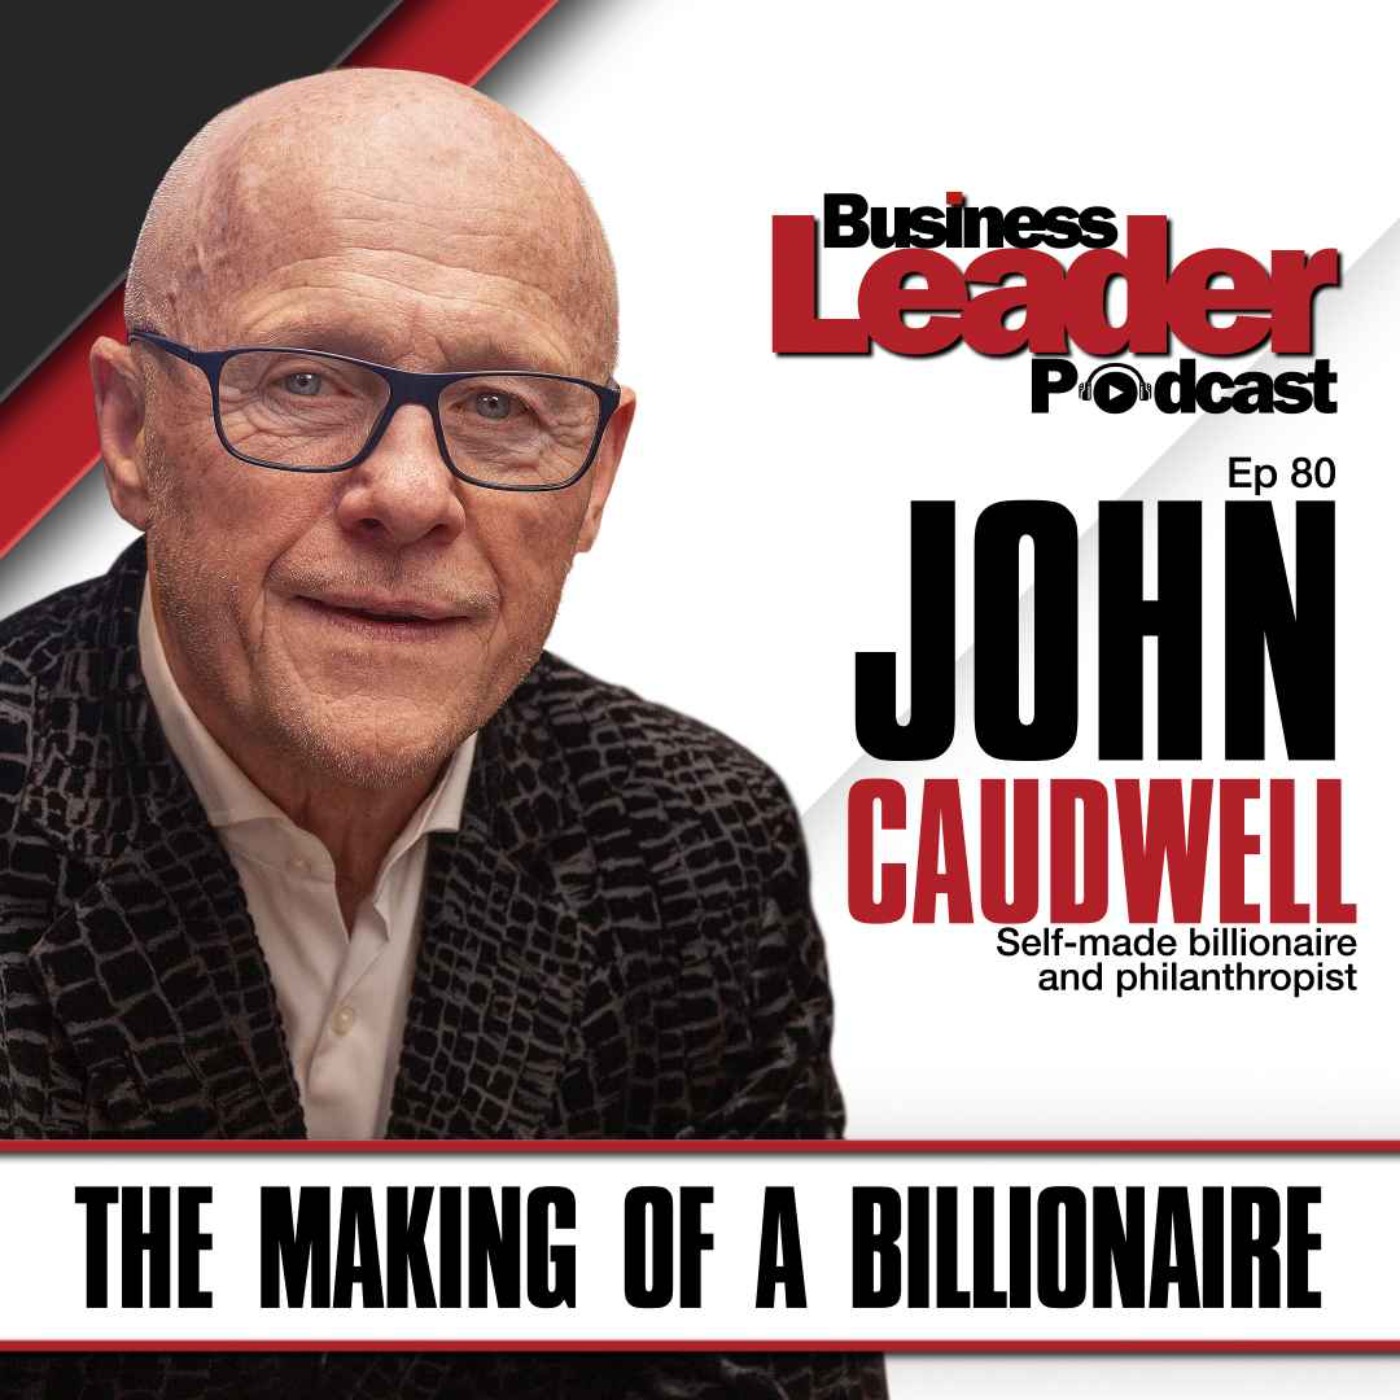 John Caudwell: The Making of a Billionaire